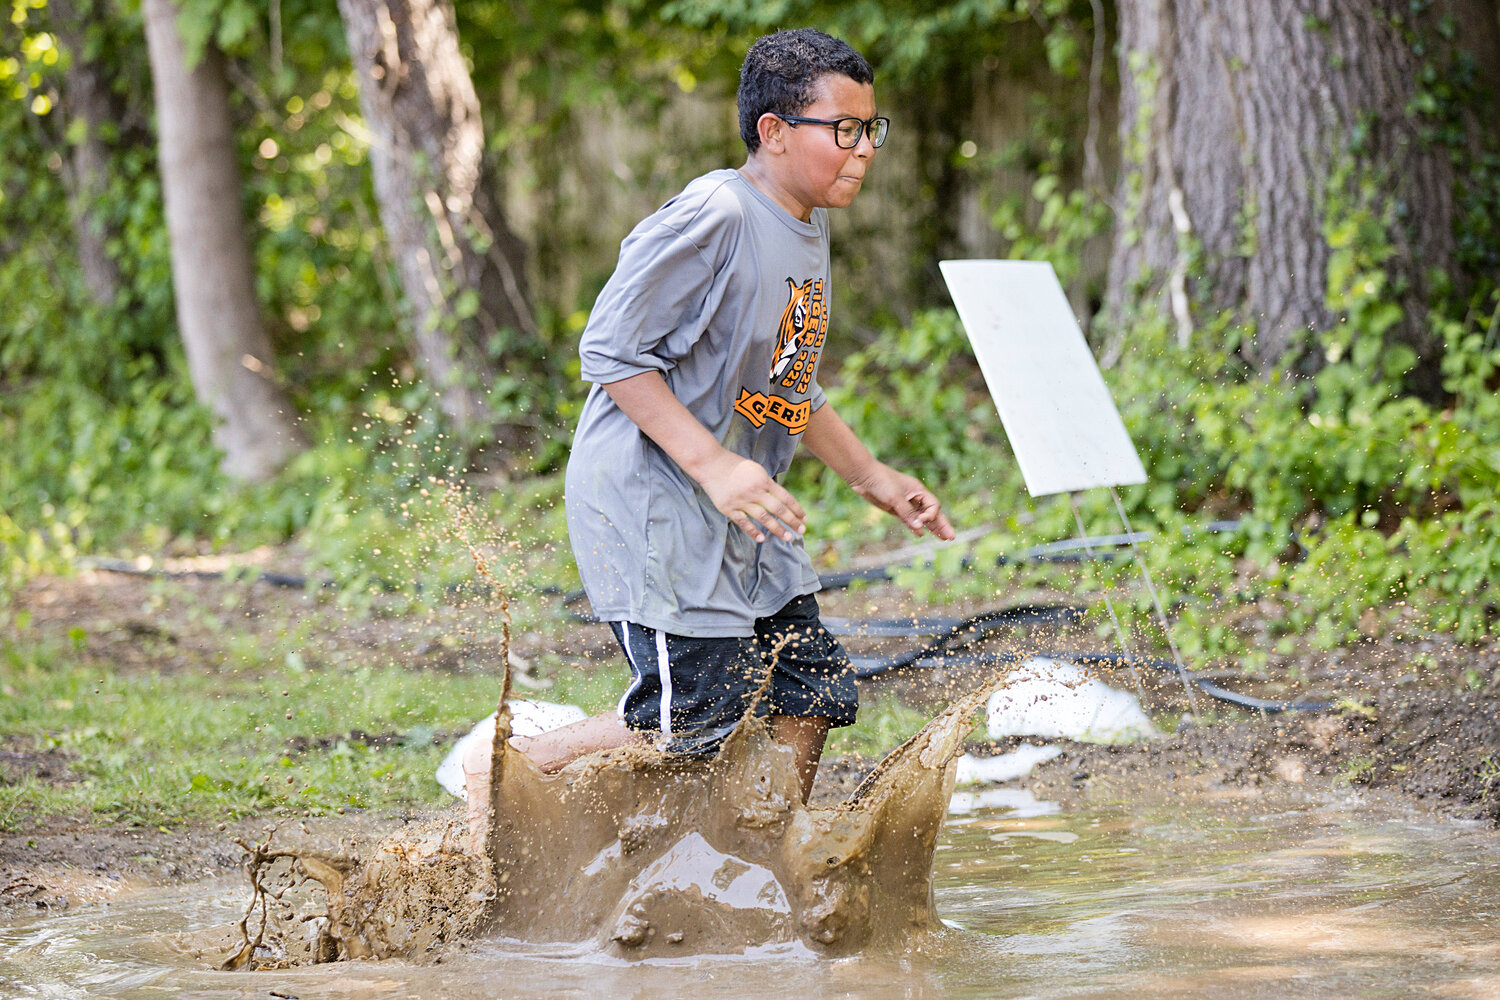 A competitor makes a splash while running through a mud obstacle.